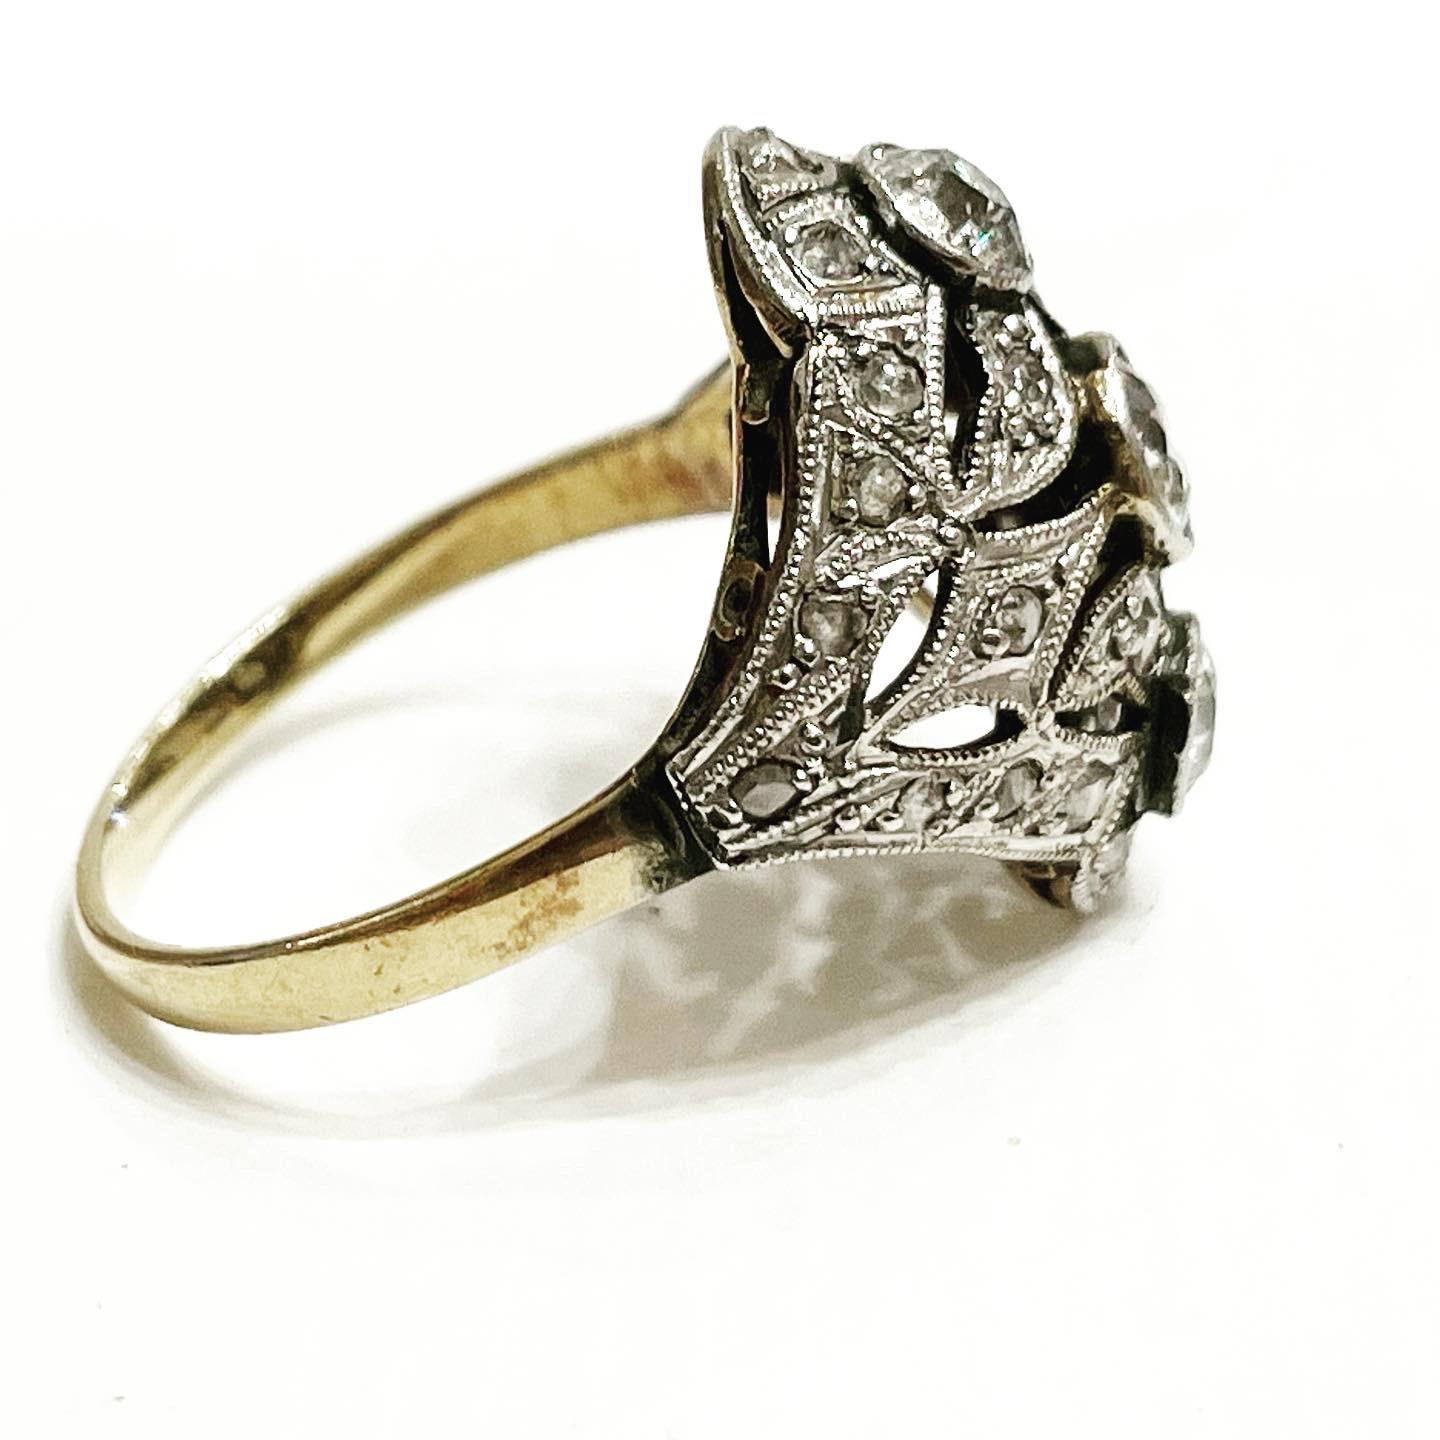 Unique and exquisite Art Nouveau Style.
1900s diamond three stones ring crafted in 18kt yellow gold topped with platinum, This piece features 3 old European Cut diamonds nestled together at the center, 
A gorgeous design, it could make a unique